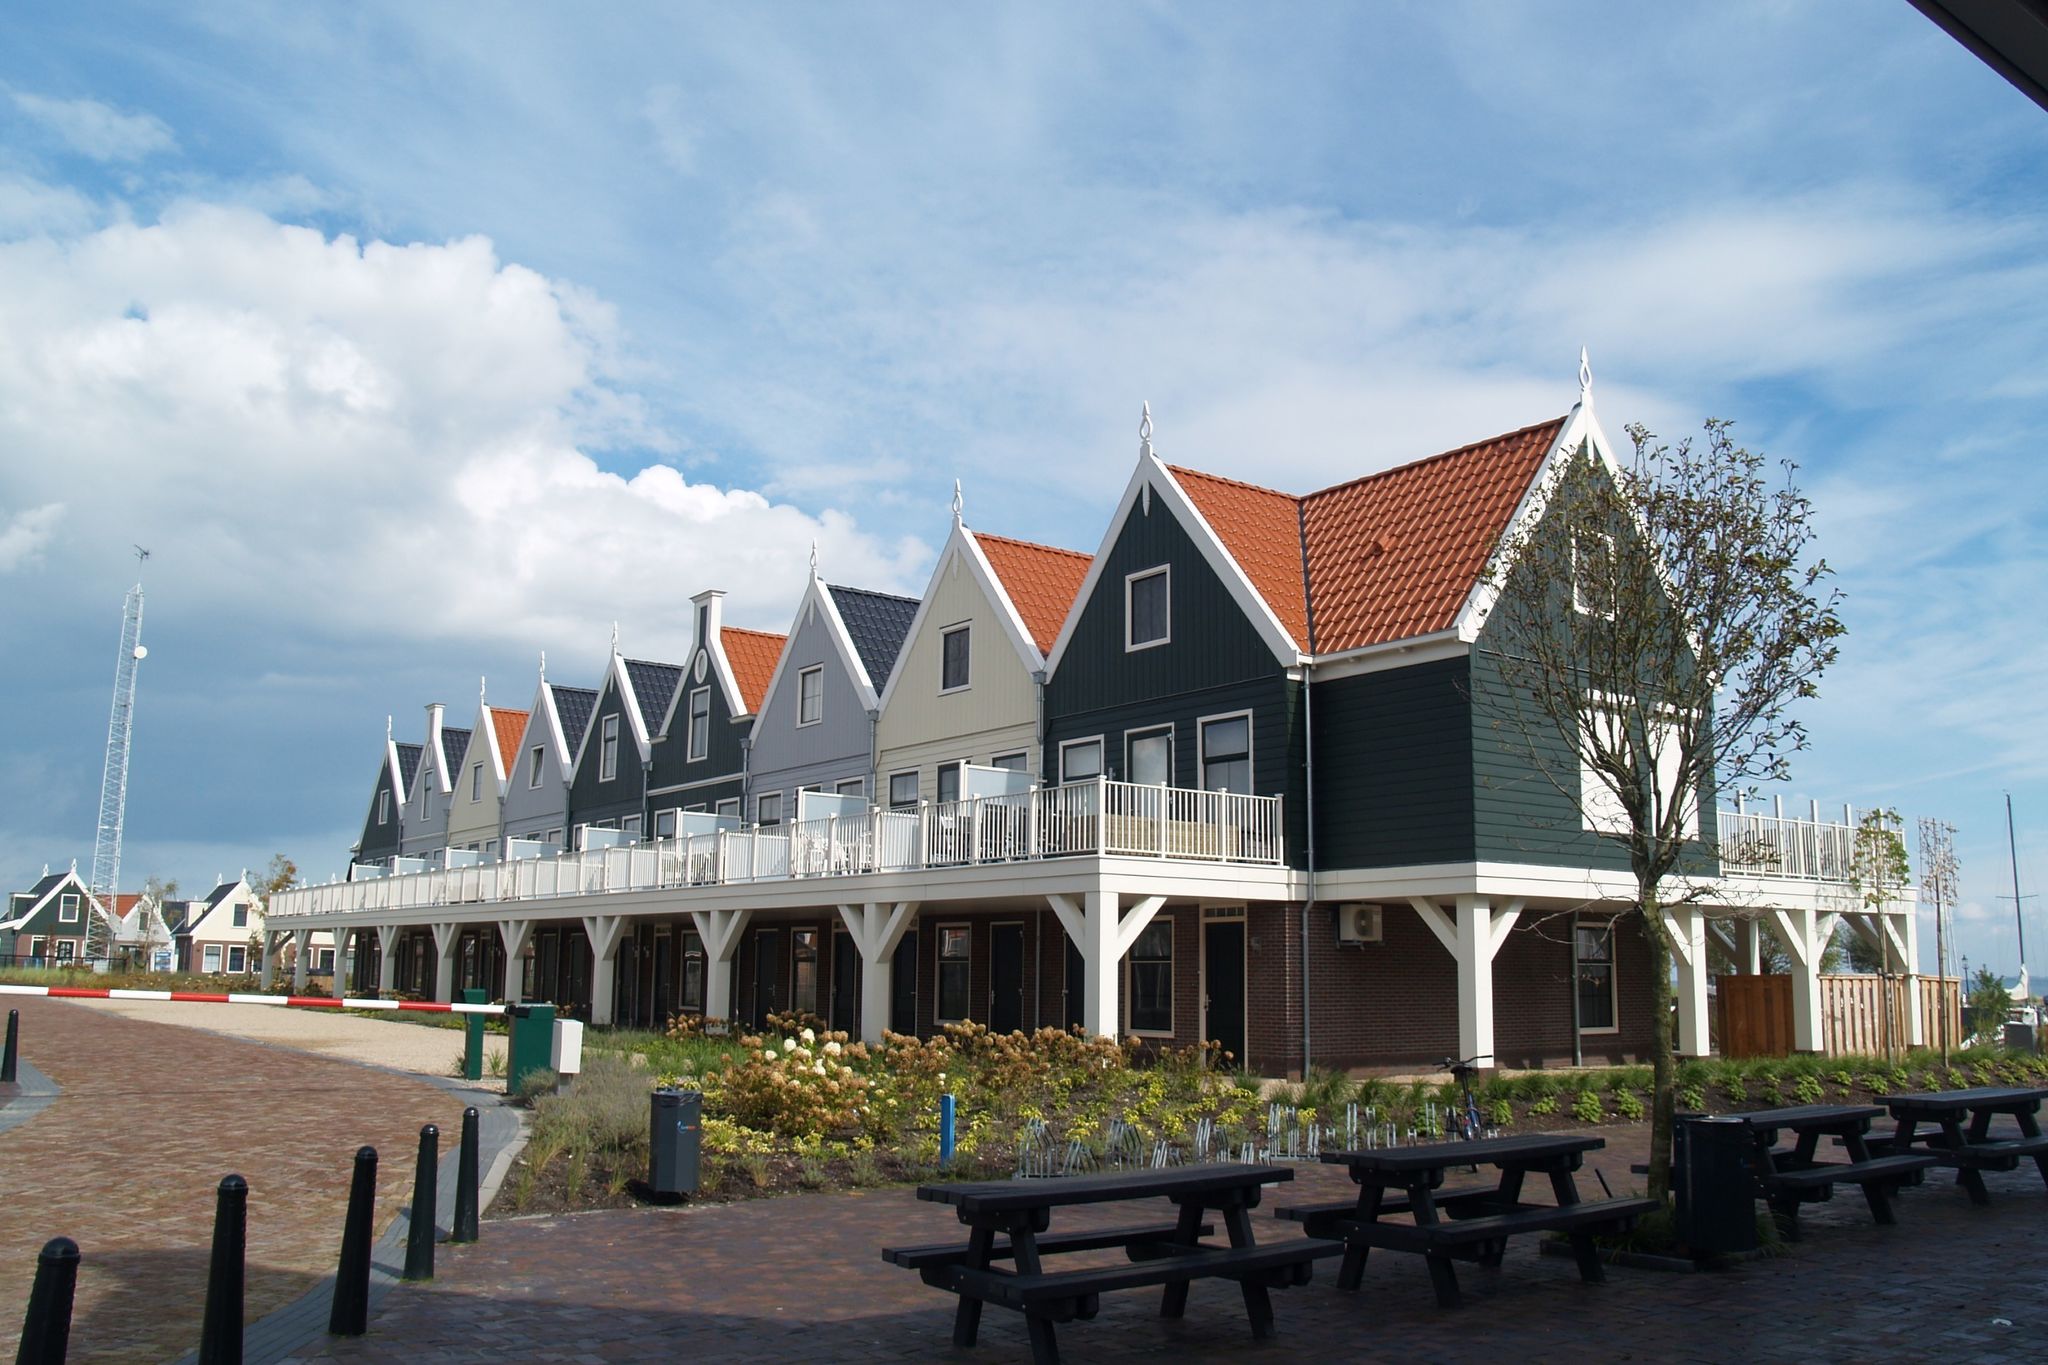 Spacious holiday home on the Markermeer, near Amsterdam